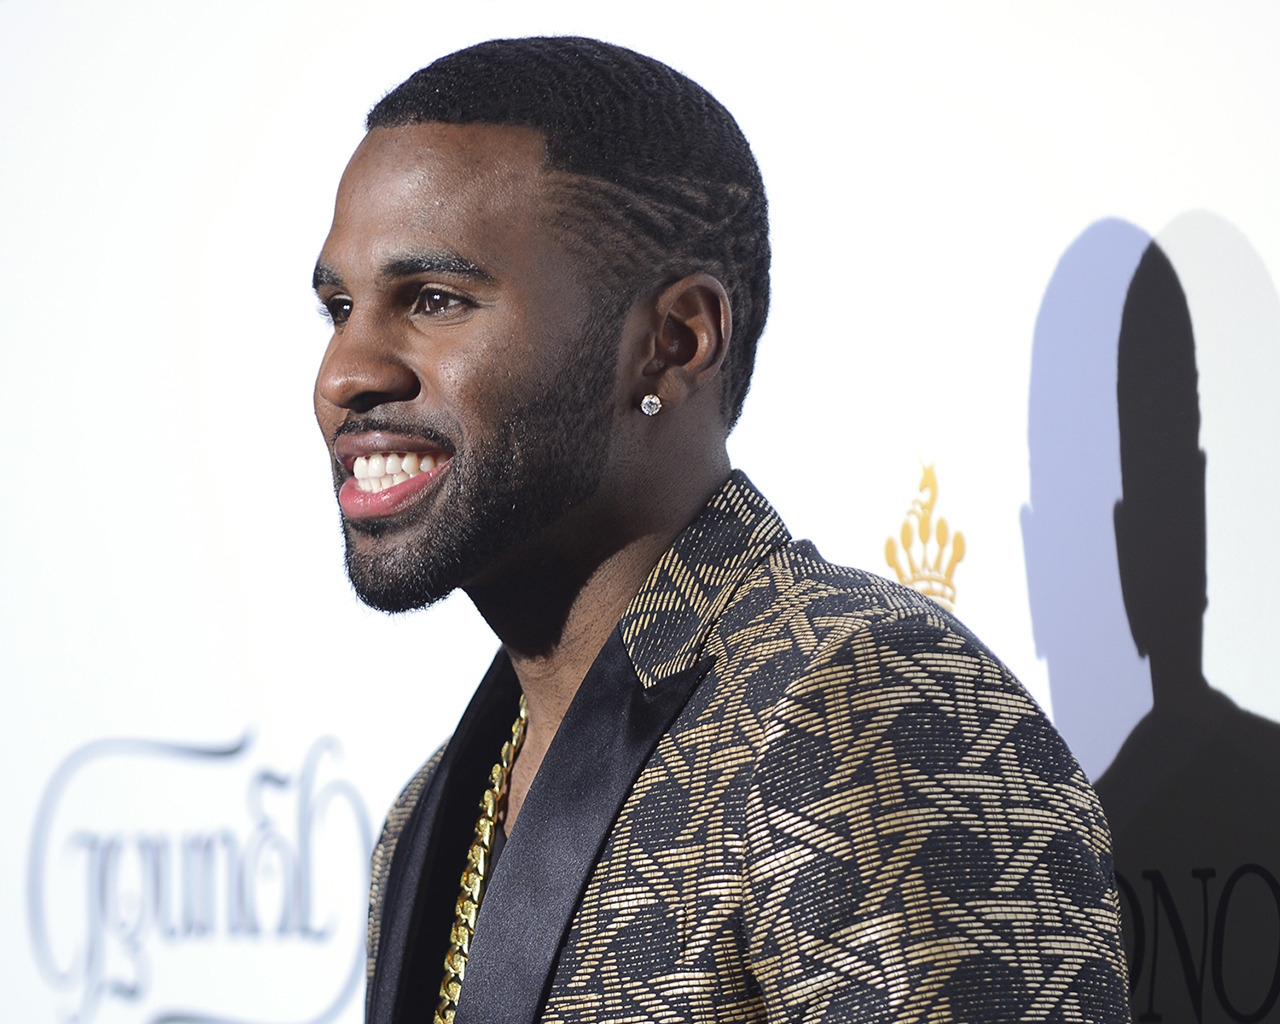 Jason Derulo at Cannes for 1280 x 1024 resolution